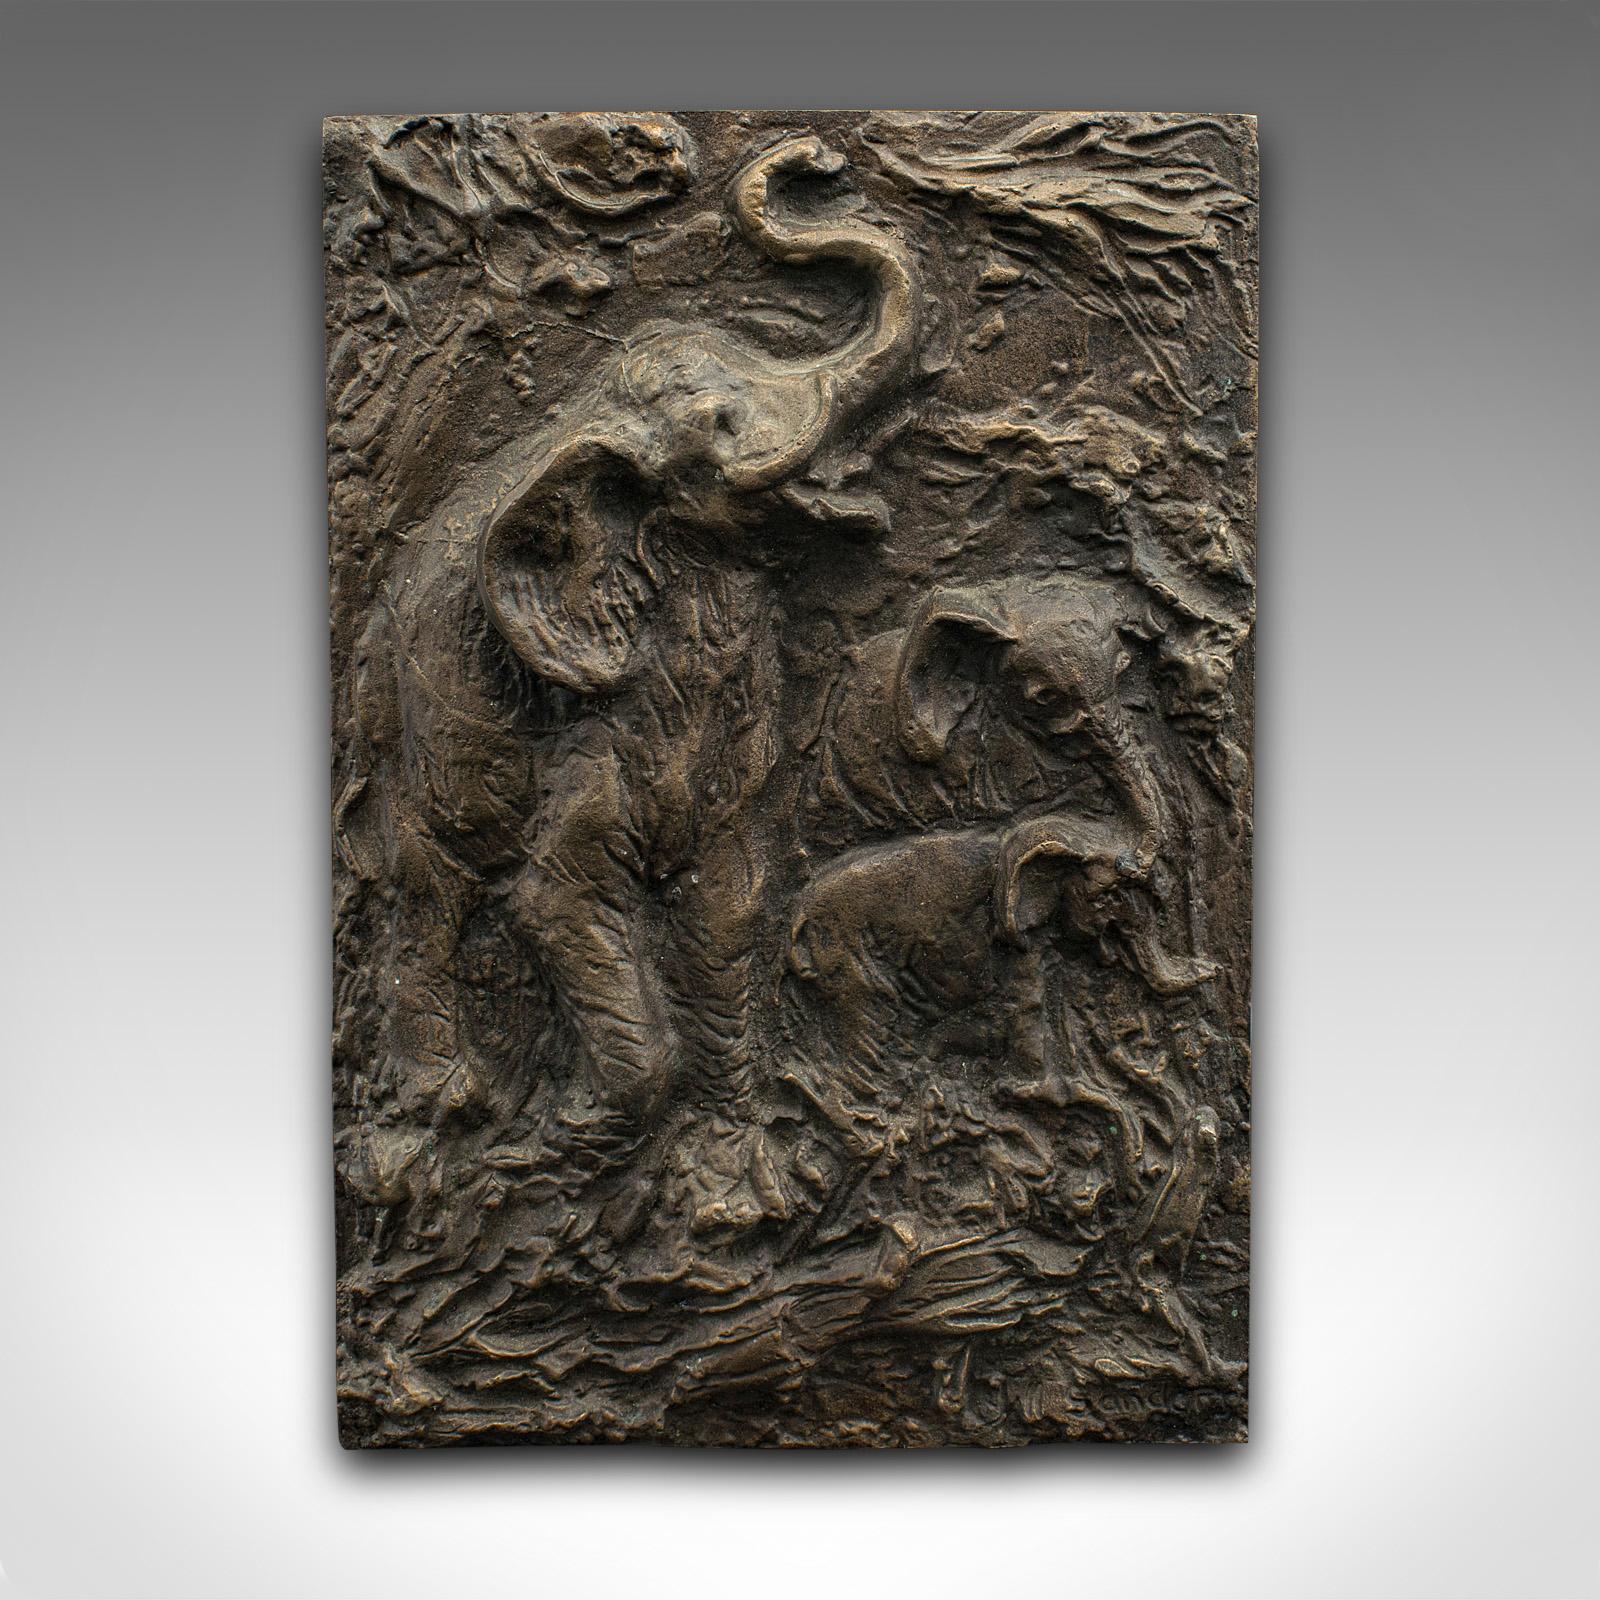 This is a vintage elephant relief plaque. An English, bronze outdoor plate, dating to the mid 20th century, circa 1960.

Appealing relief with charming elephant decor
Displays a desirable aged patina and in good original order
Bronze presents